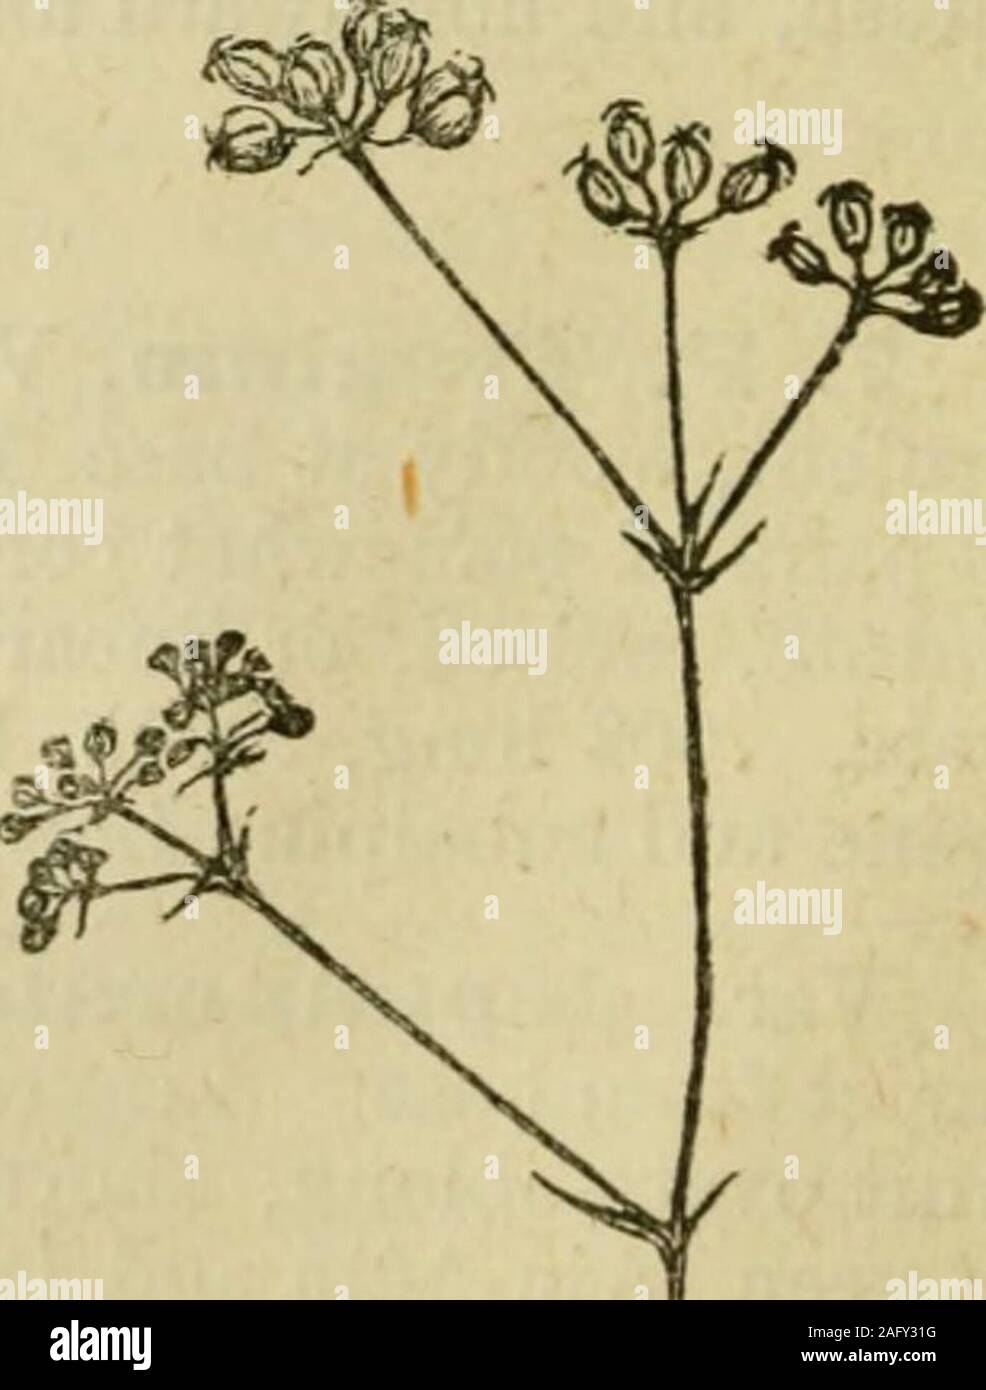 . Flora of Syria, Palestine, and Sinai : from the Taurus to Ras Muhammas and from the Mediterranean sea to the Syrian desert. Fig. 181. Root-leaves stem-leaves ovate in outline, dissected into setaceous lobes.Umbels short, 2-4-rayed ; bracts of in-volucre and involucel subulate, acute,the latter nearly as long as flowers ;pedicels scarcely as long as .002 long,shining fruits — August and September— Woods and thickets ; Amanus toAkherdagh. A plant with aspect ofCarum setaceum, Schrenck = Bunium ca-pillifolium, Kar. et Kir.. Fruiting umbels of S. capillifolia, UMBELLIFER^. (PARSLEY FAMILY.) 351 Stock Photo